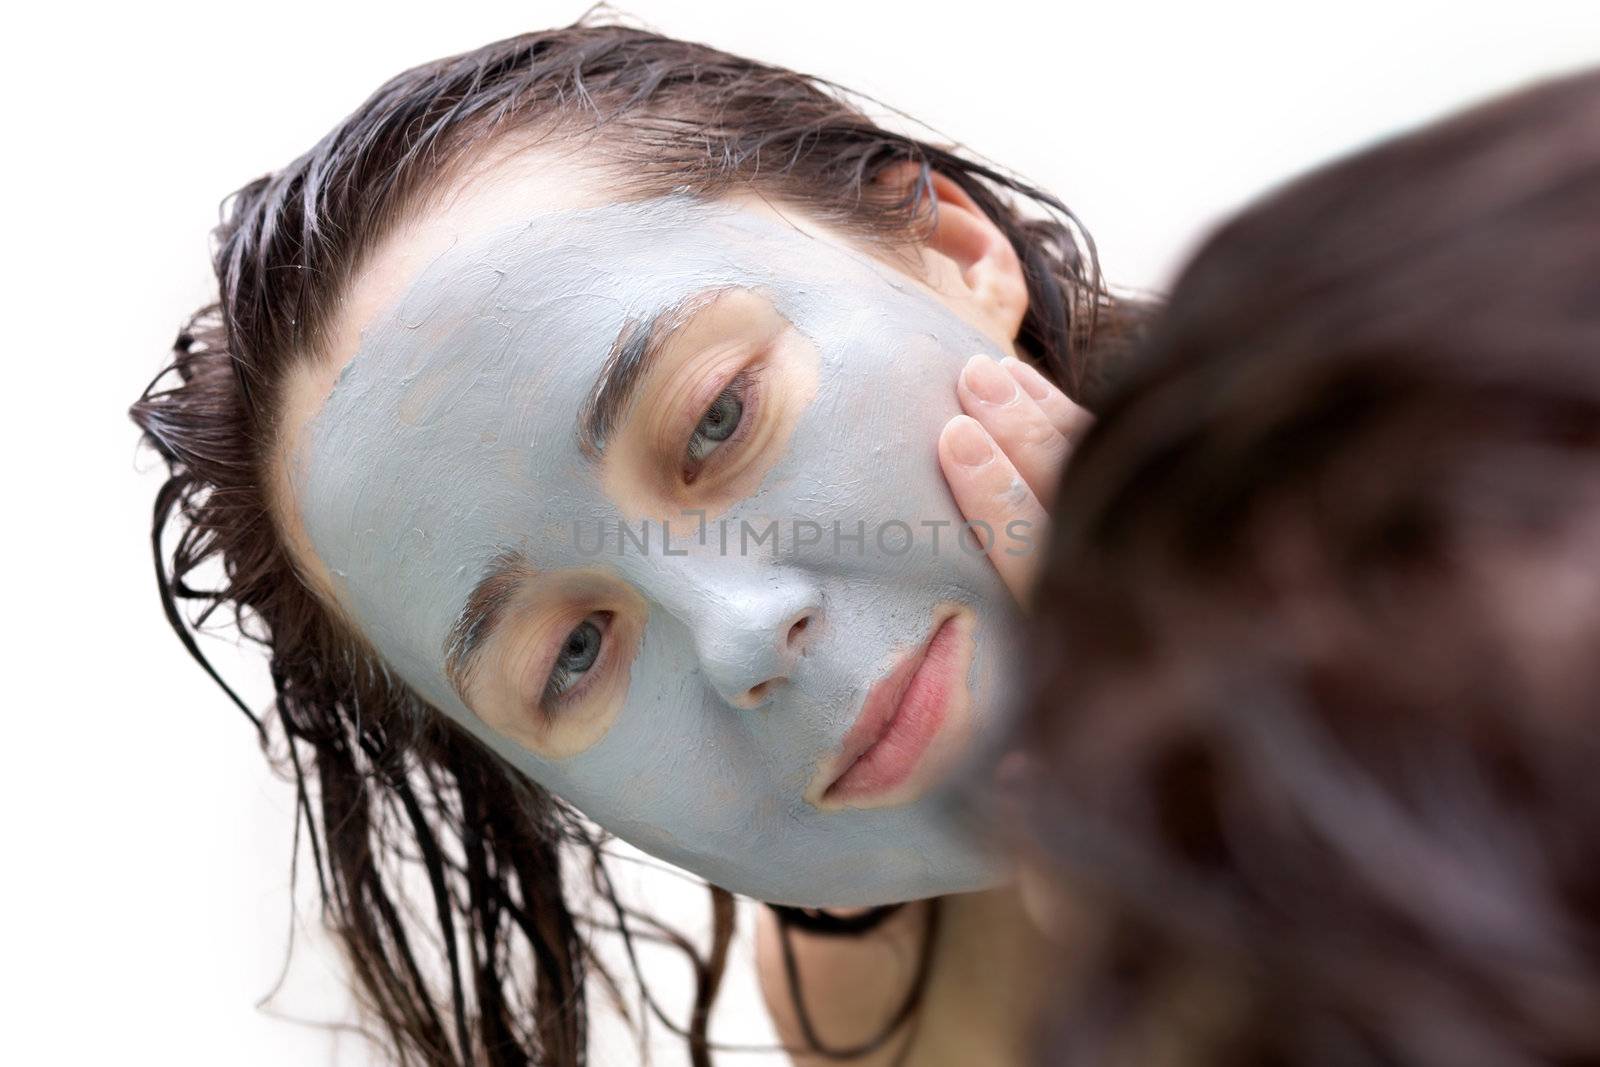 Girl putting a mud mask by velkol